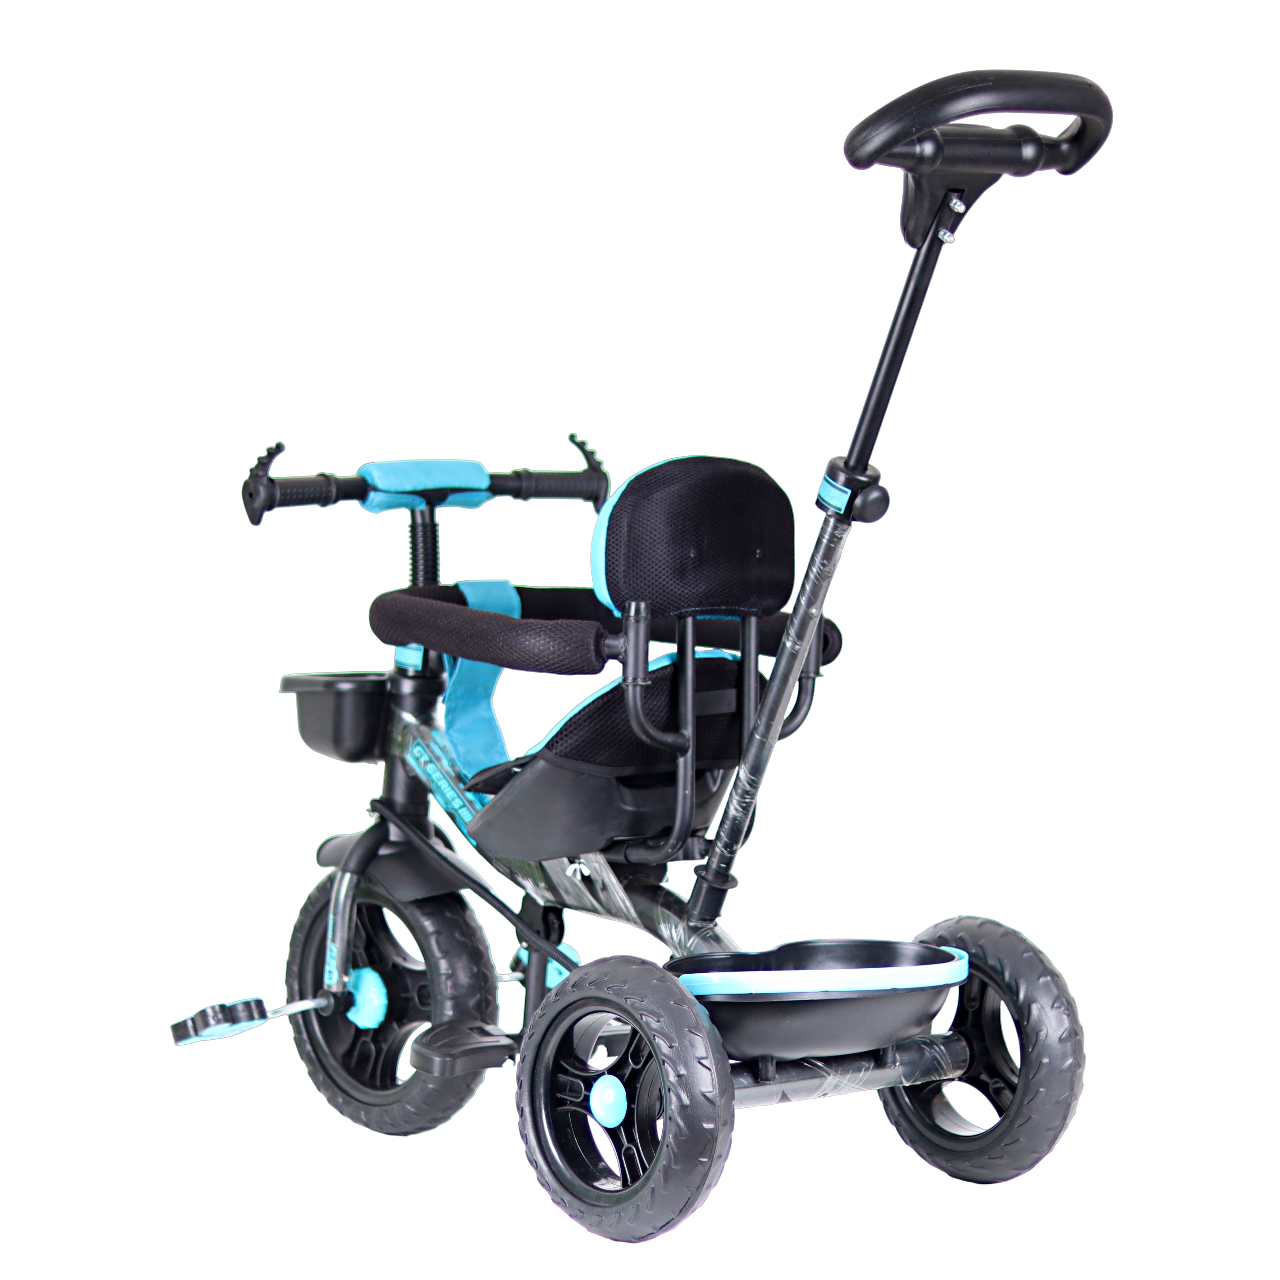 Luusa GT-1 Tricycle Plug N Play Kids with Parental Control, Cushion seat and Safety Guard Rail Carrying Capacity Upto 30kgs